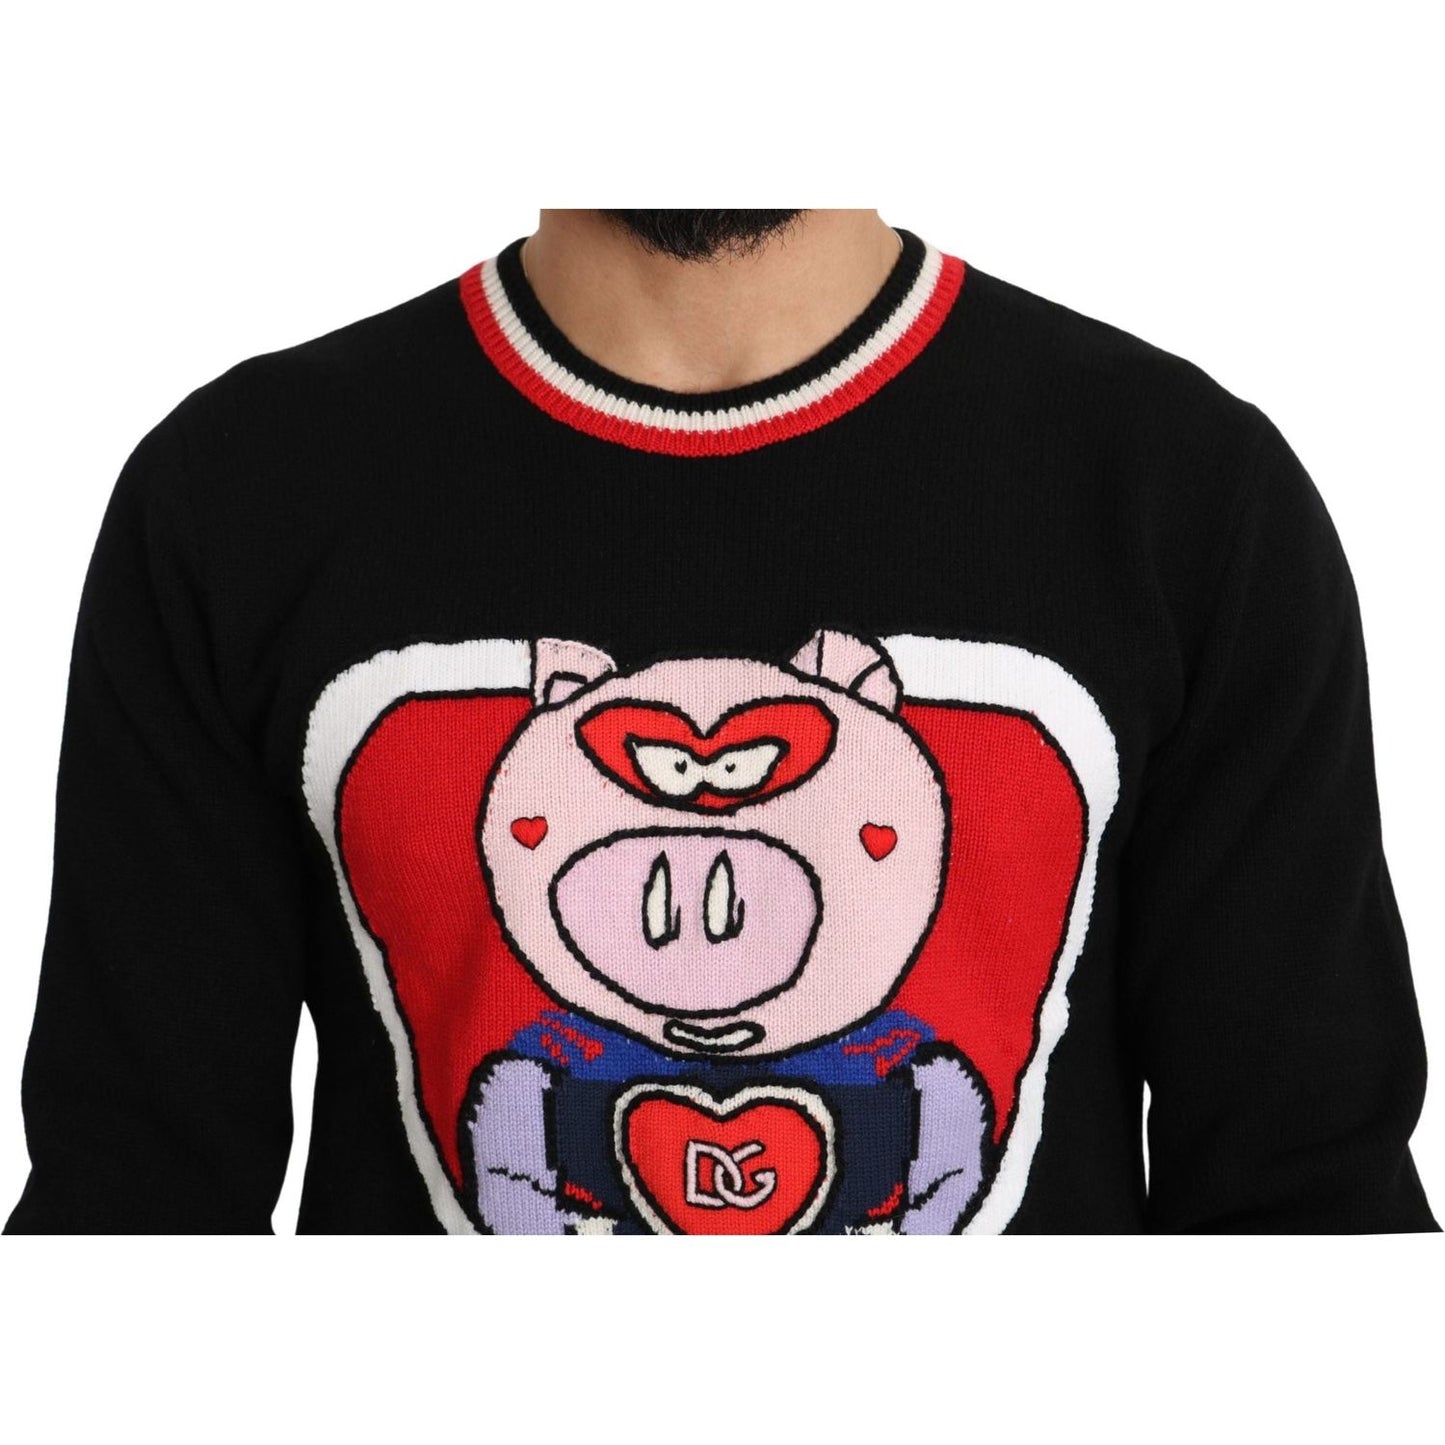 Dolce & Gabbana Elegant Black Cashmere Crew Neck Sweater black-cashmere-pig-of-the-year-pullover-sweater